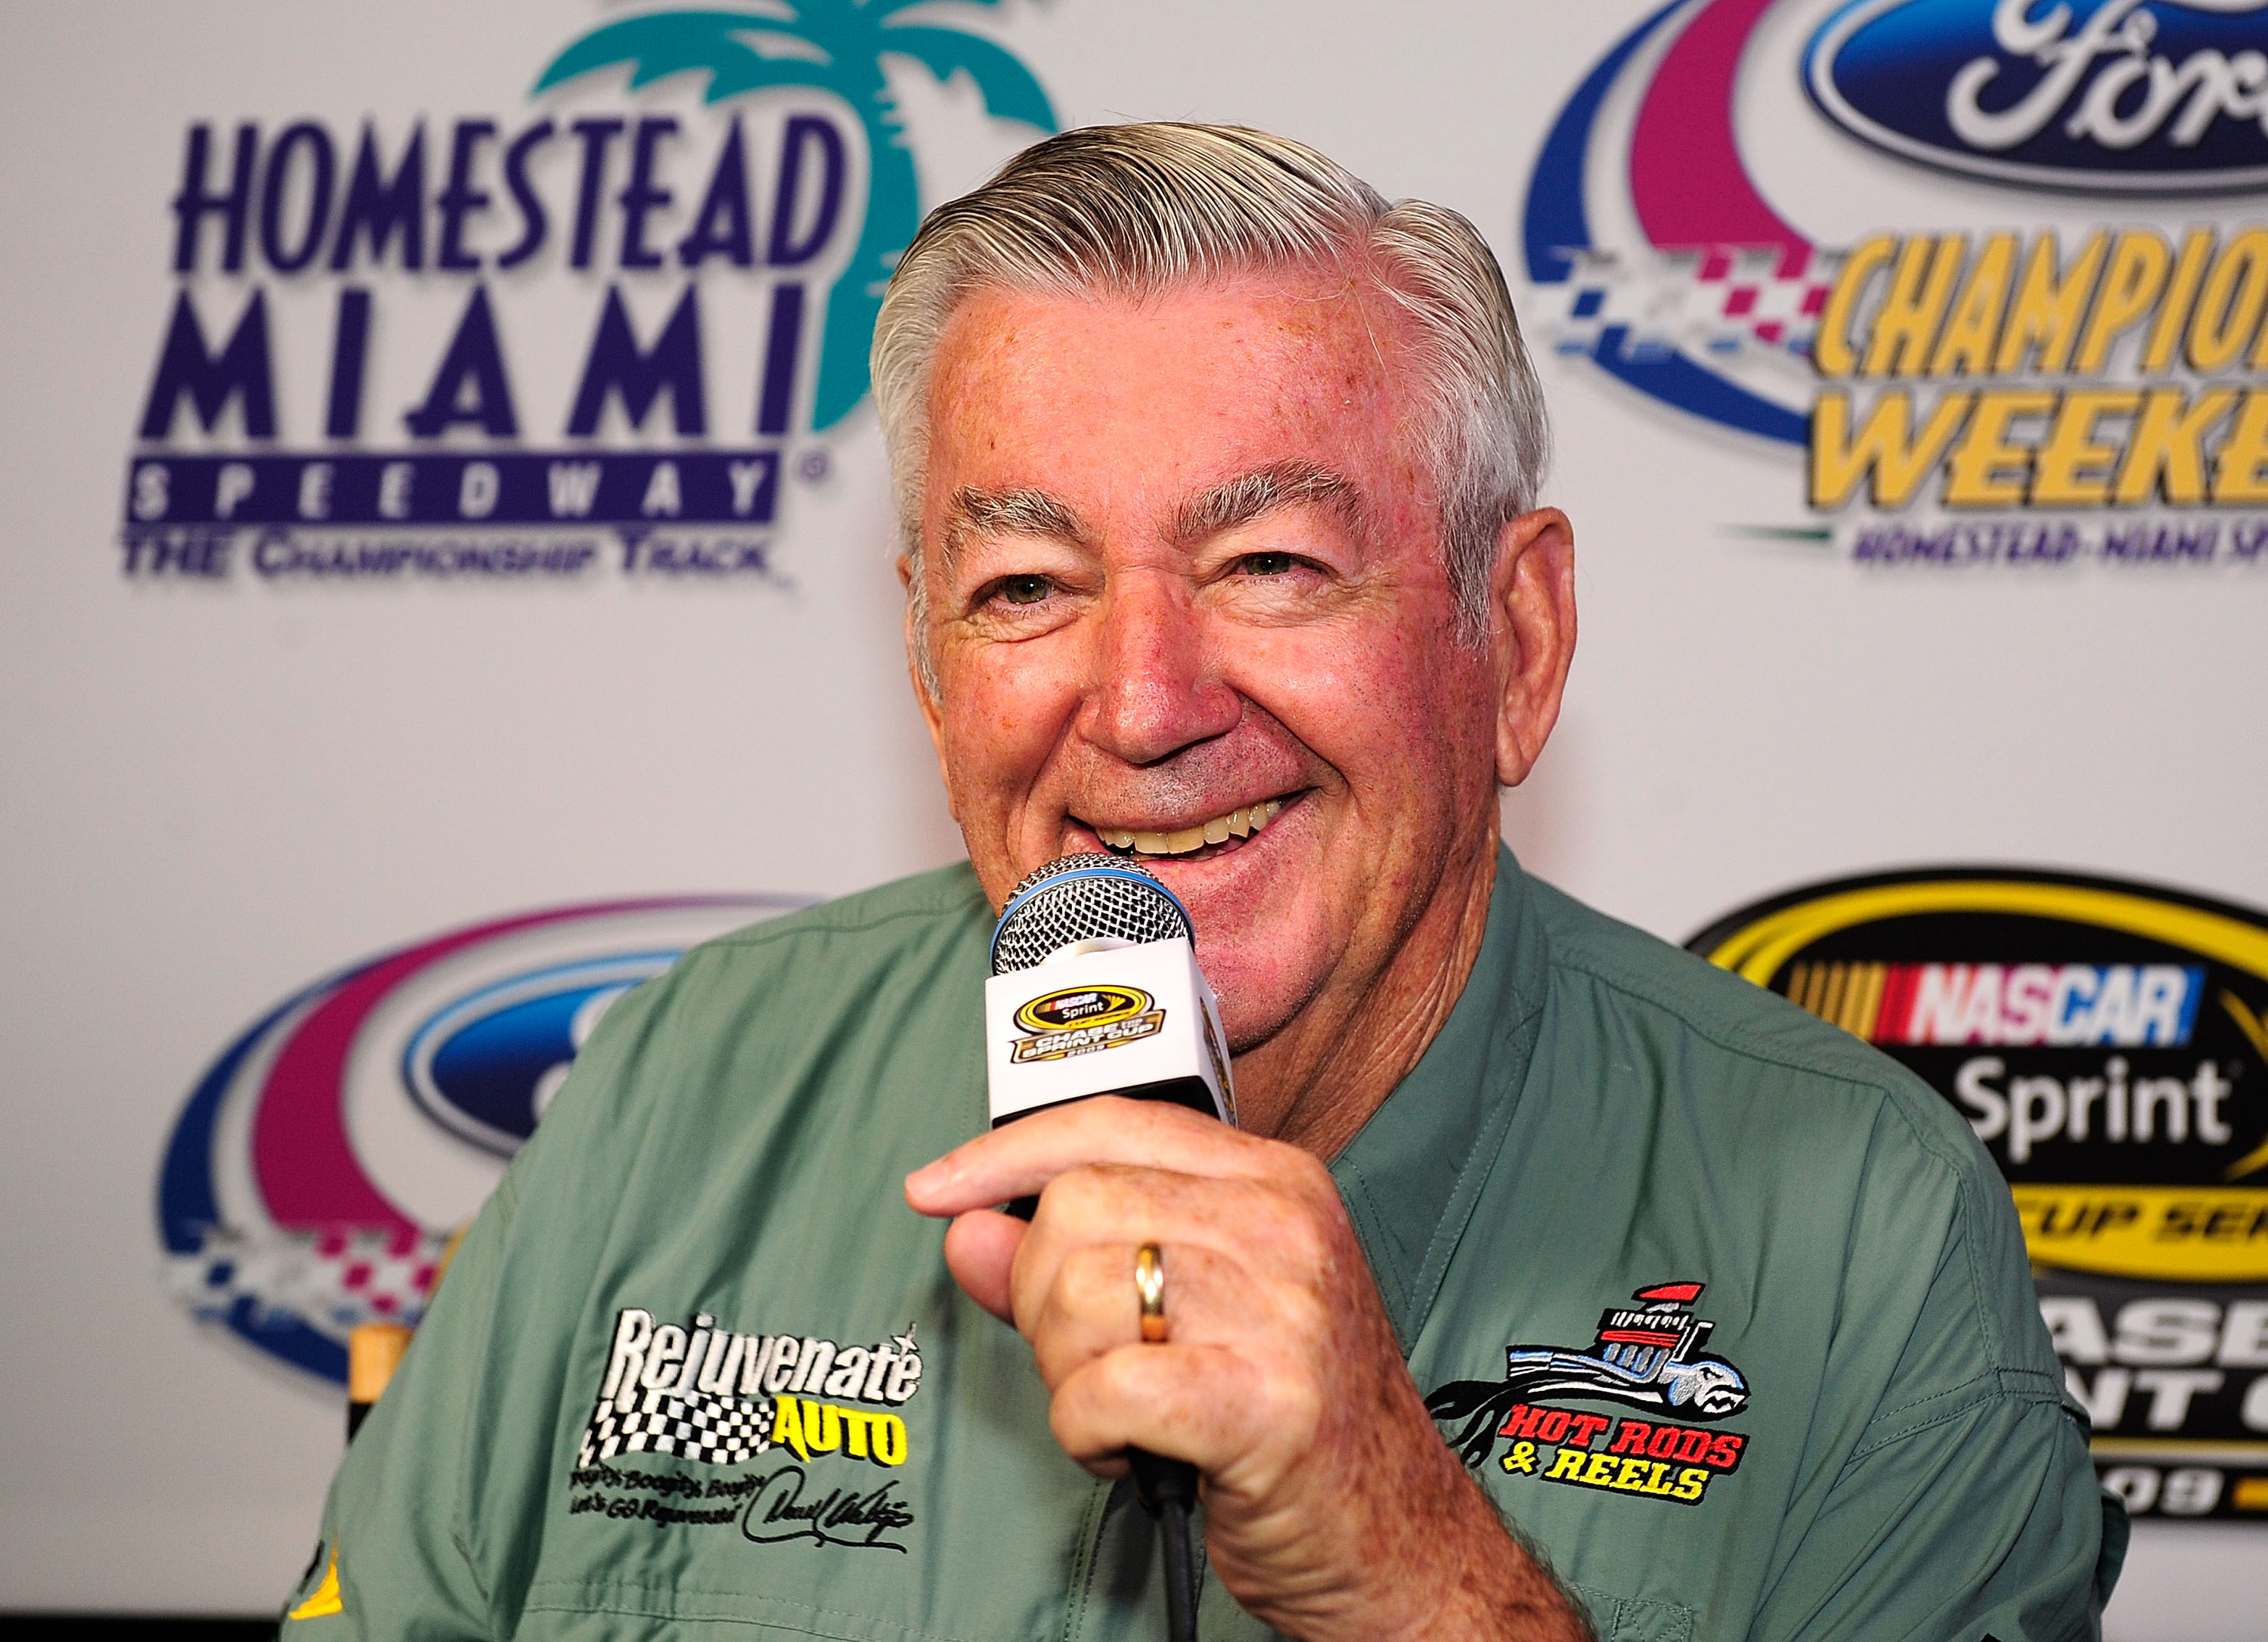 CORAL GABLES, FL - NOVEMBER 19:  NASCAR legend Bobby Allison speaks to the media during the NASCAR Championship Contenders  Press Conference on November 19, 2009 in Coral Gables, Florida.  (Photo by Sam Greenwood/Getty Images for NASCAR)